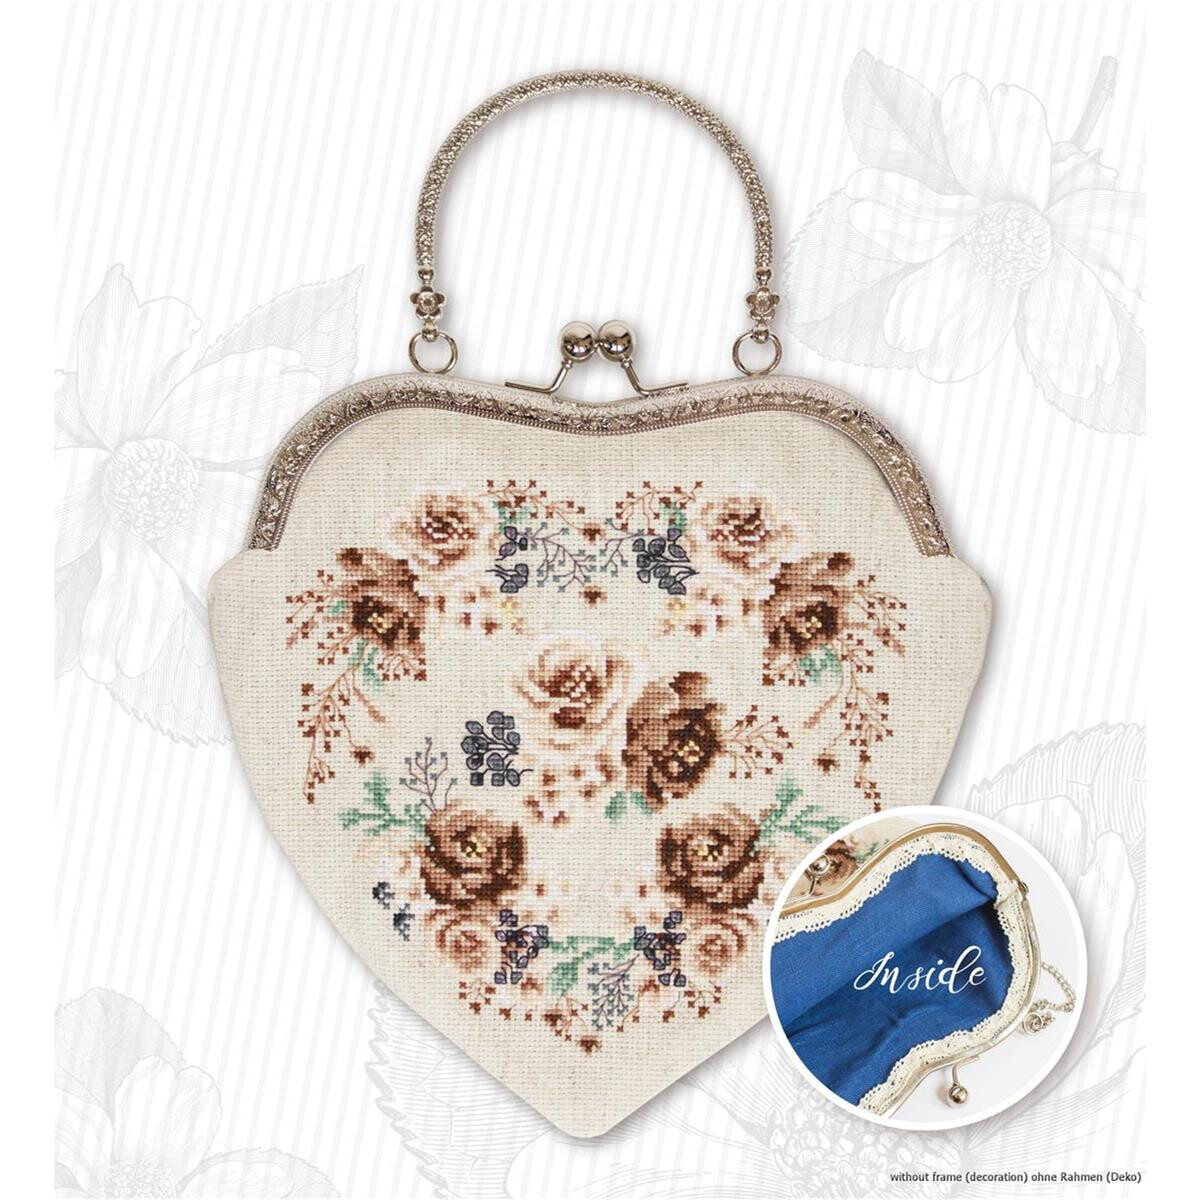 A heart-shaped handbag with a vintage metal clasp and an...